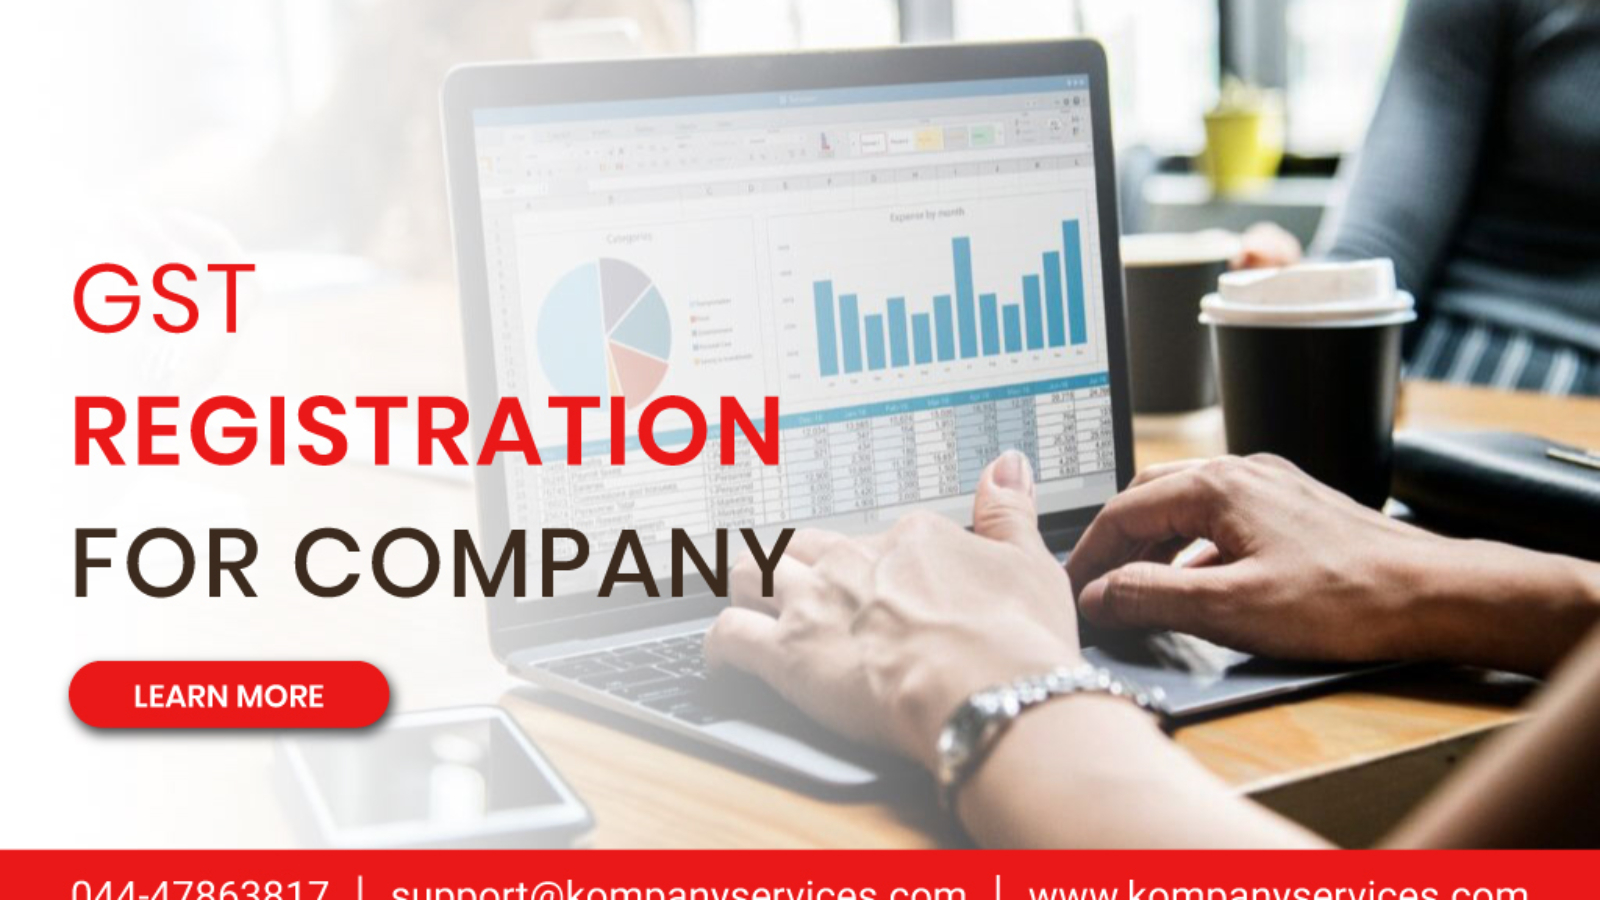 GST Registration for Company